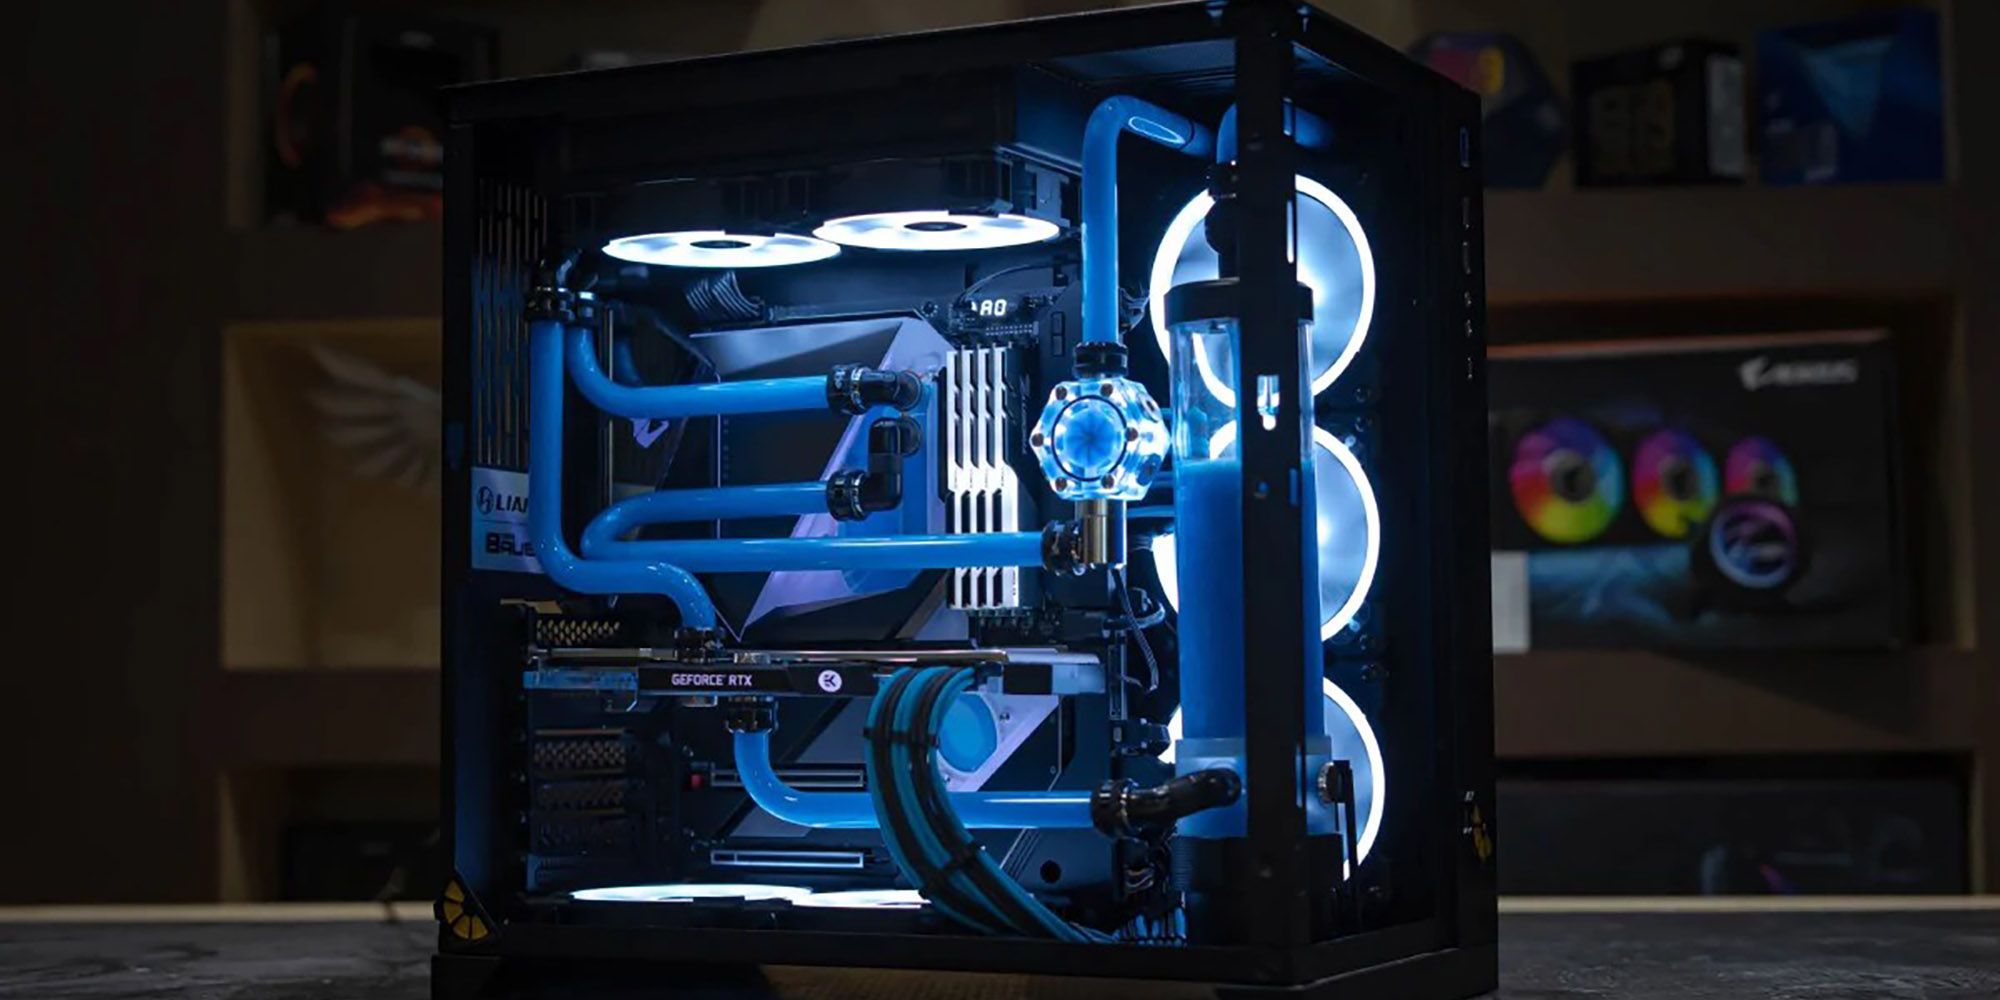 A custom PC with water cooling and blue lights